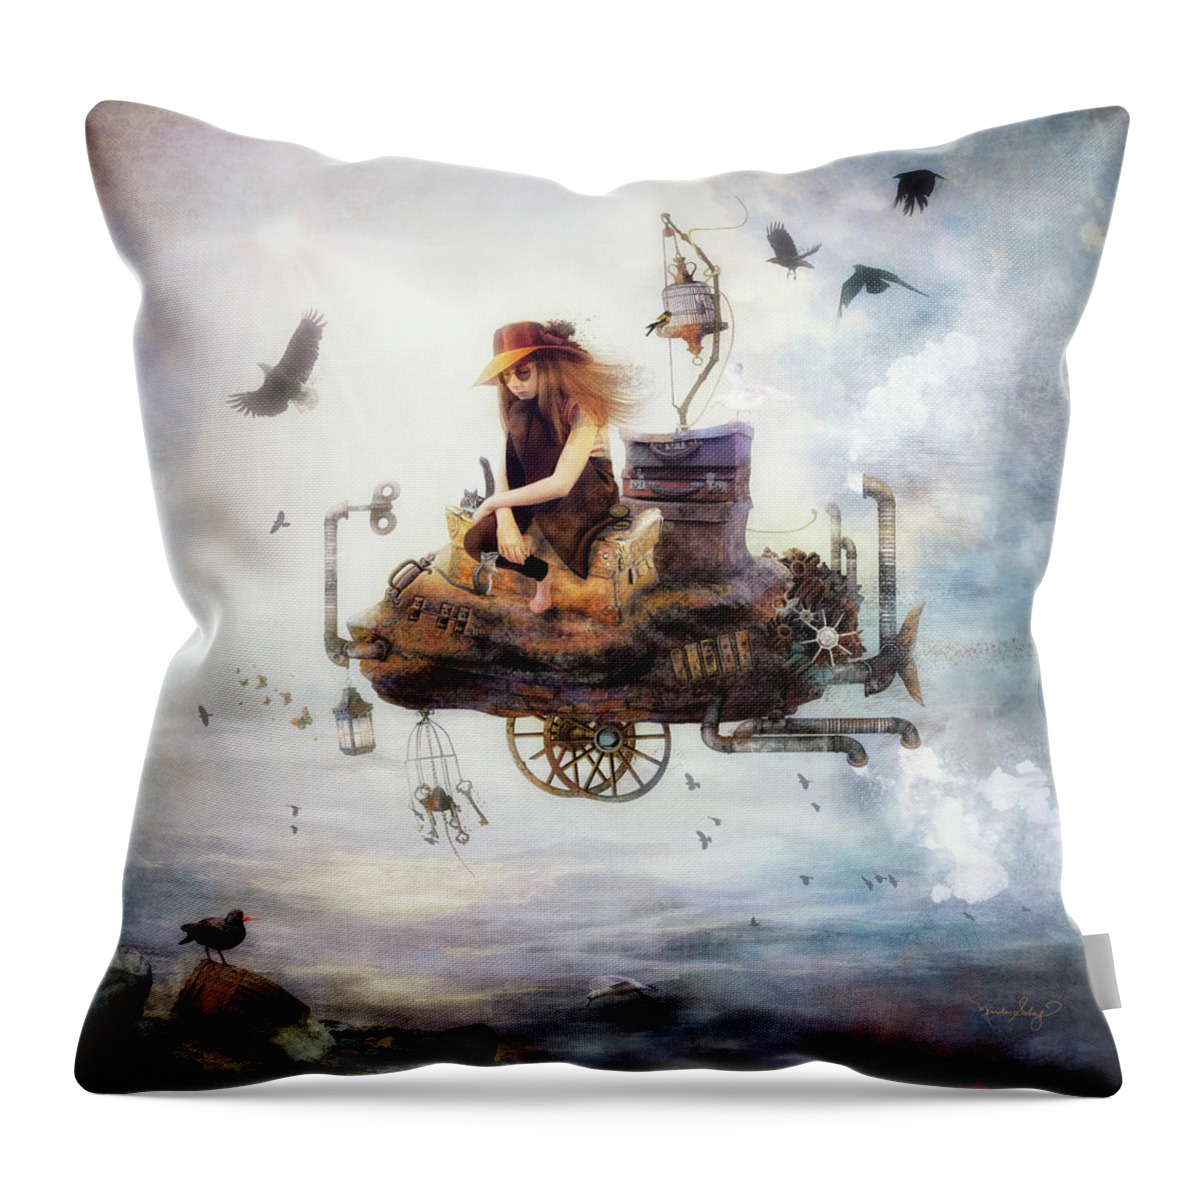 Steampunk Throw Pillow featuring the digital art Heading Home by Merrilee Soberg